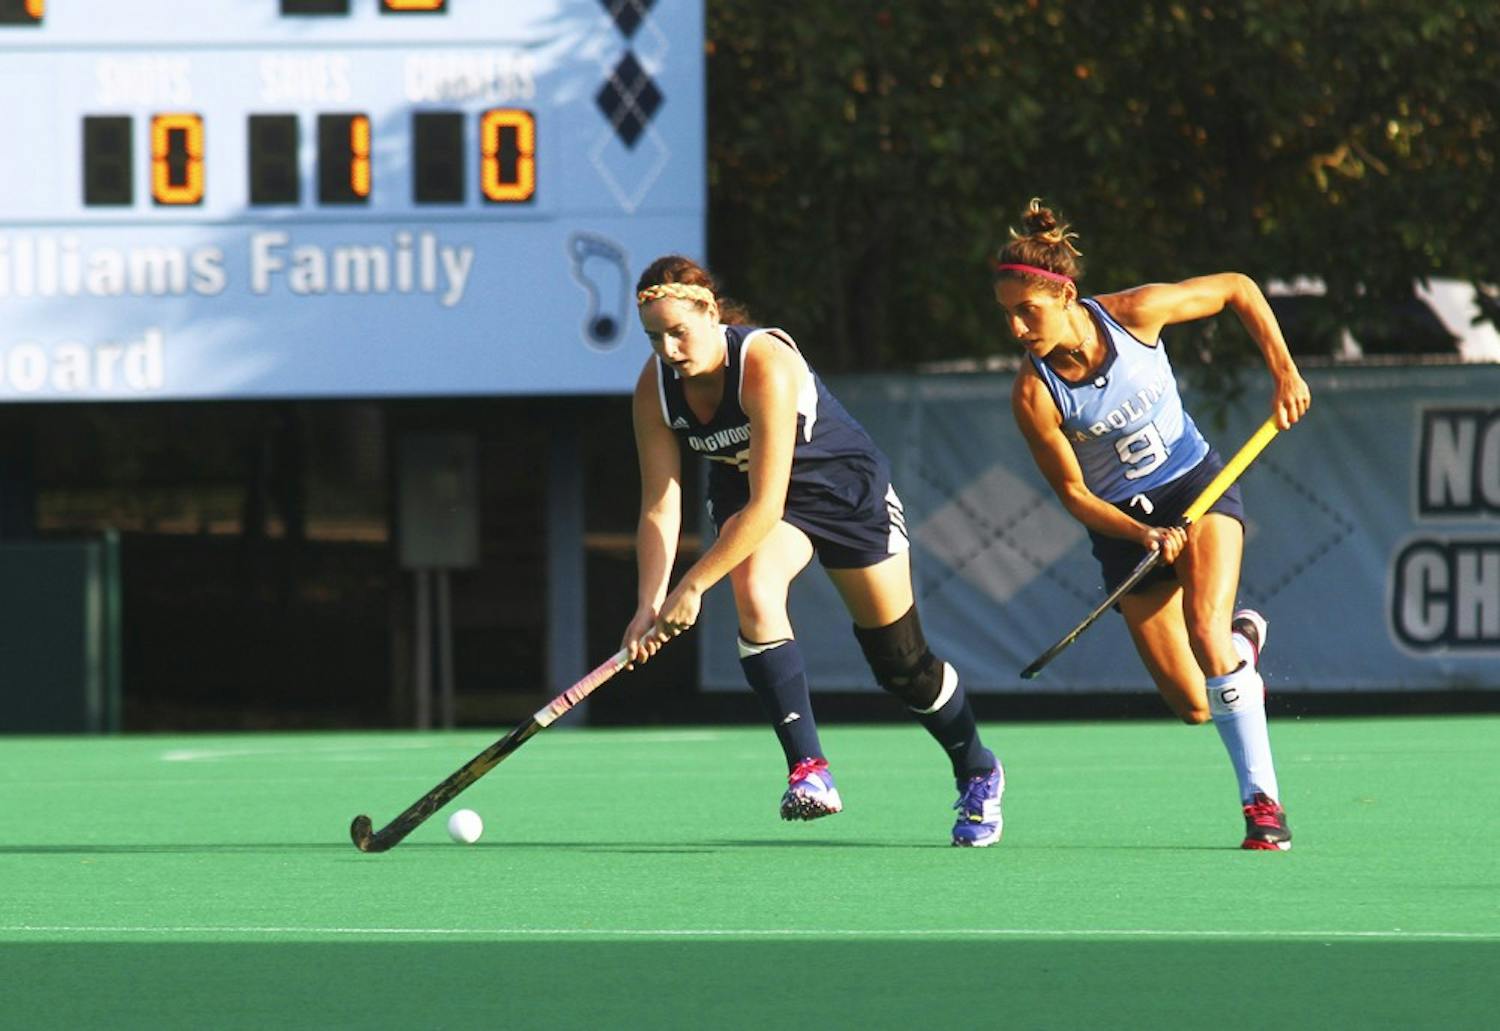 The UNC field hockey team beats Longwood on Friday afternoon, Oct. 9, with a score of 8-1. Emily Wold (9) defends an opponent.